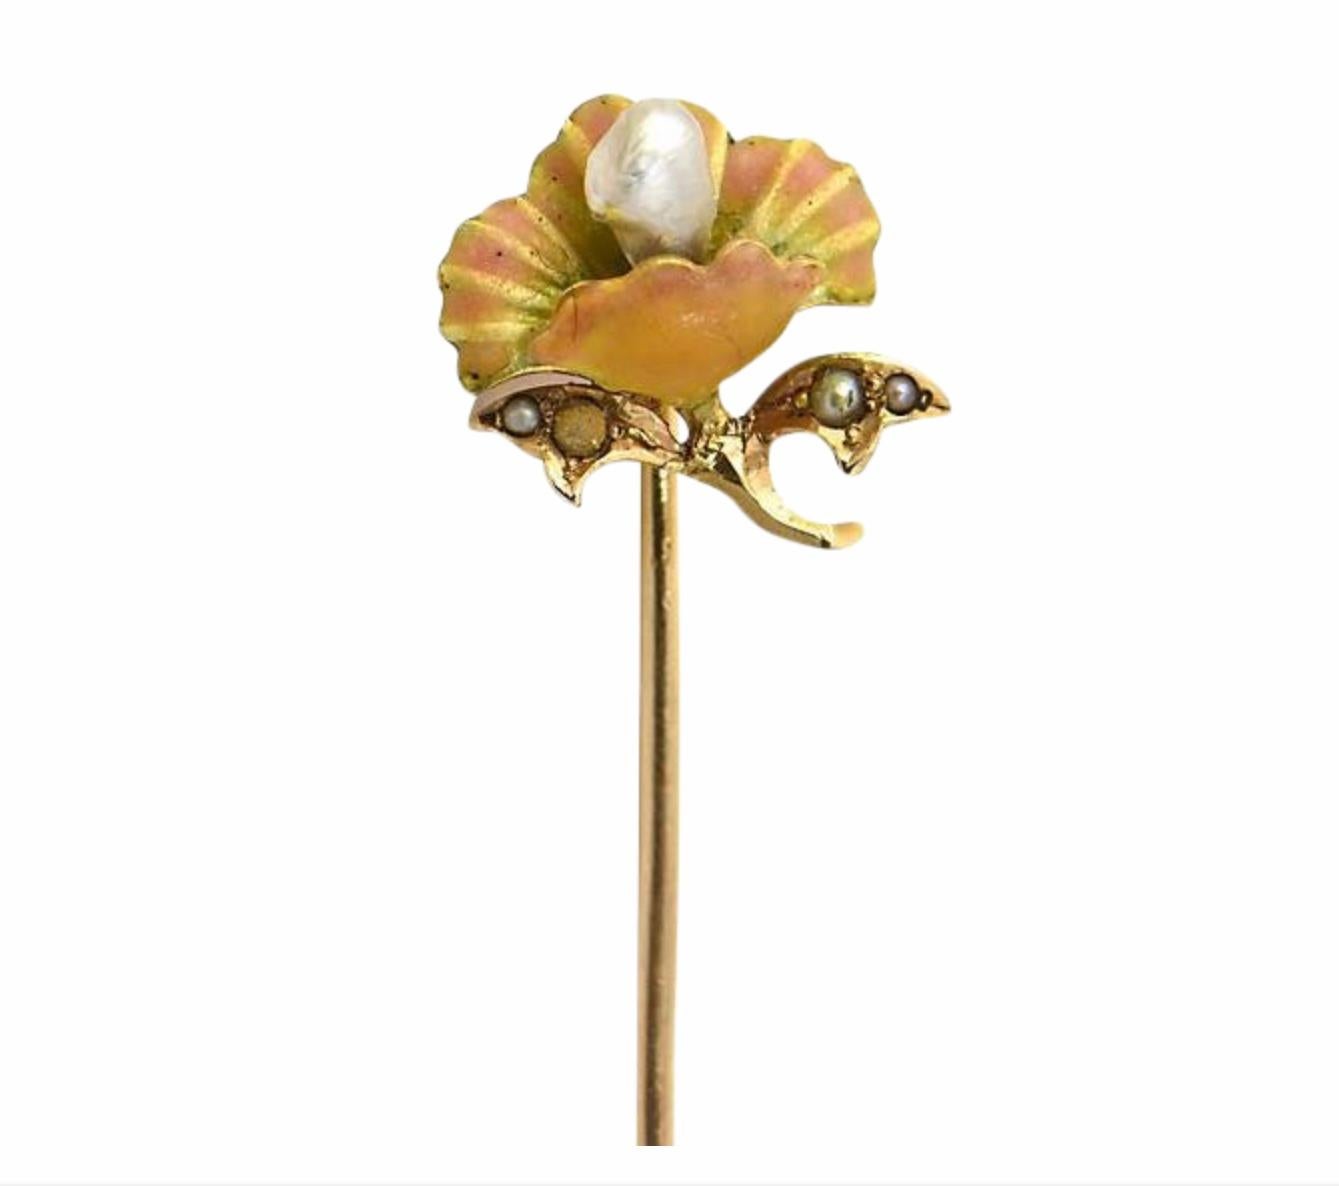 Art Nouveau floral 14K yellow gold stick pin featuring a natural pearl popping out of an enamel flower. Four tiny pearls are set in the two leaves. No maker's mark. One of the tiny pearls is missing its nacre (not easily visible without